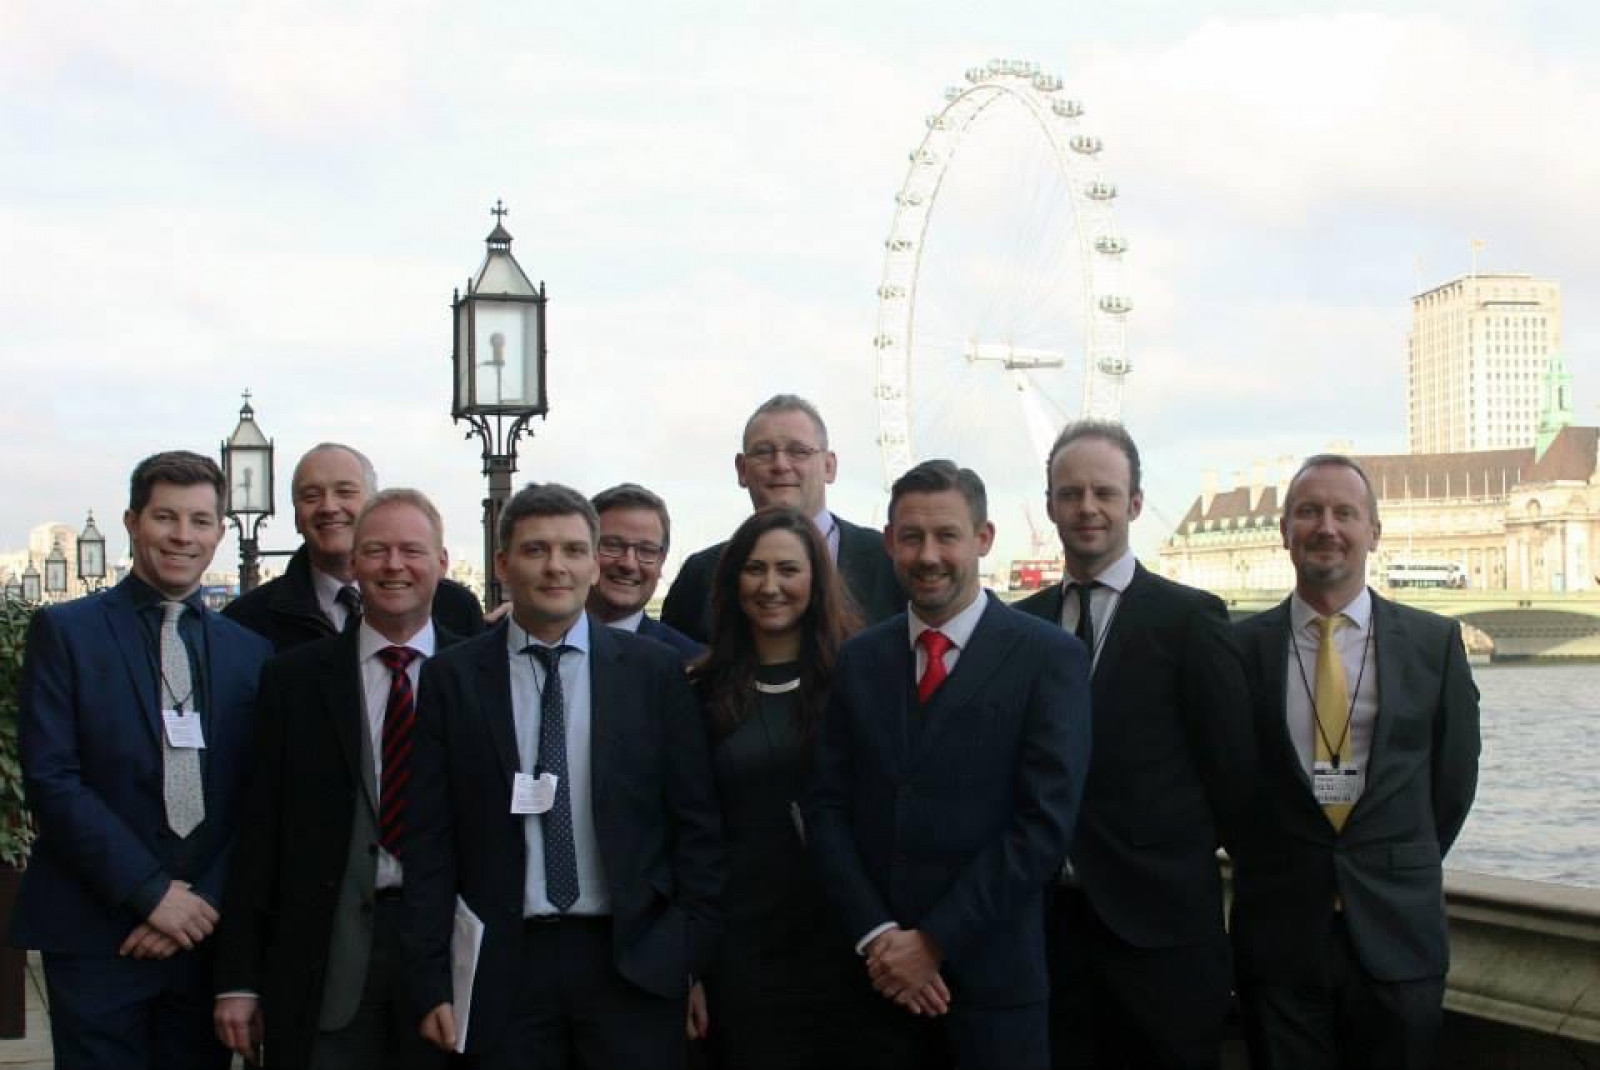 Why You should Join Made in Group's Trip to Westminster